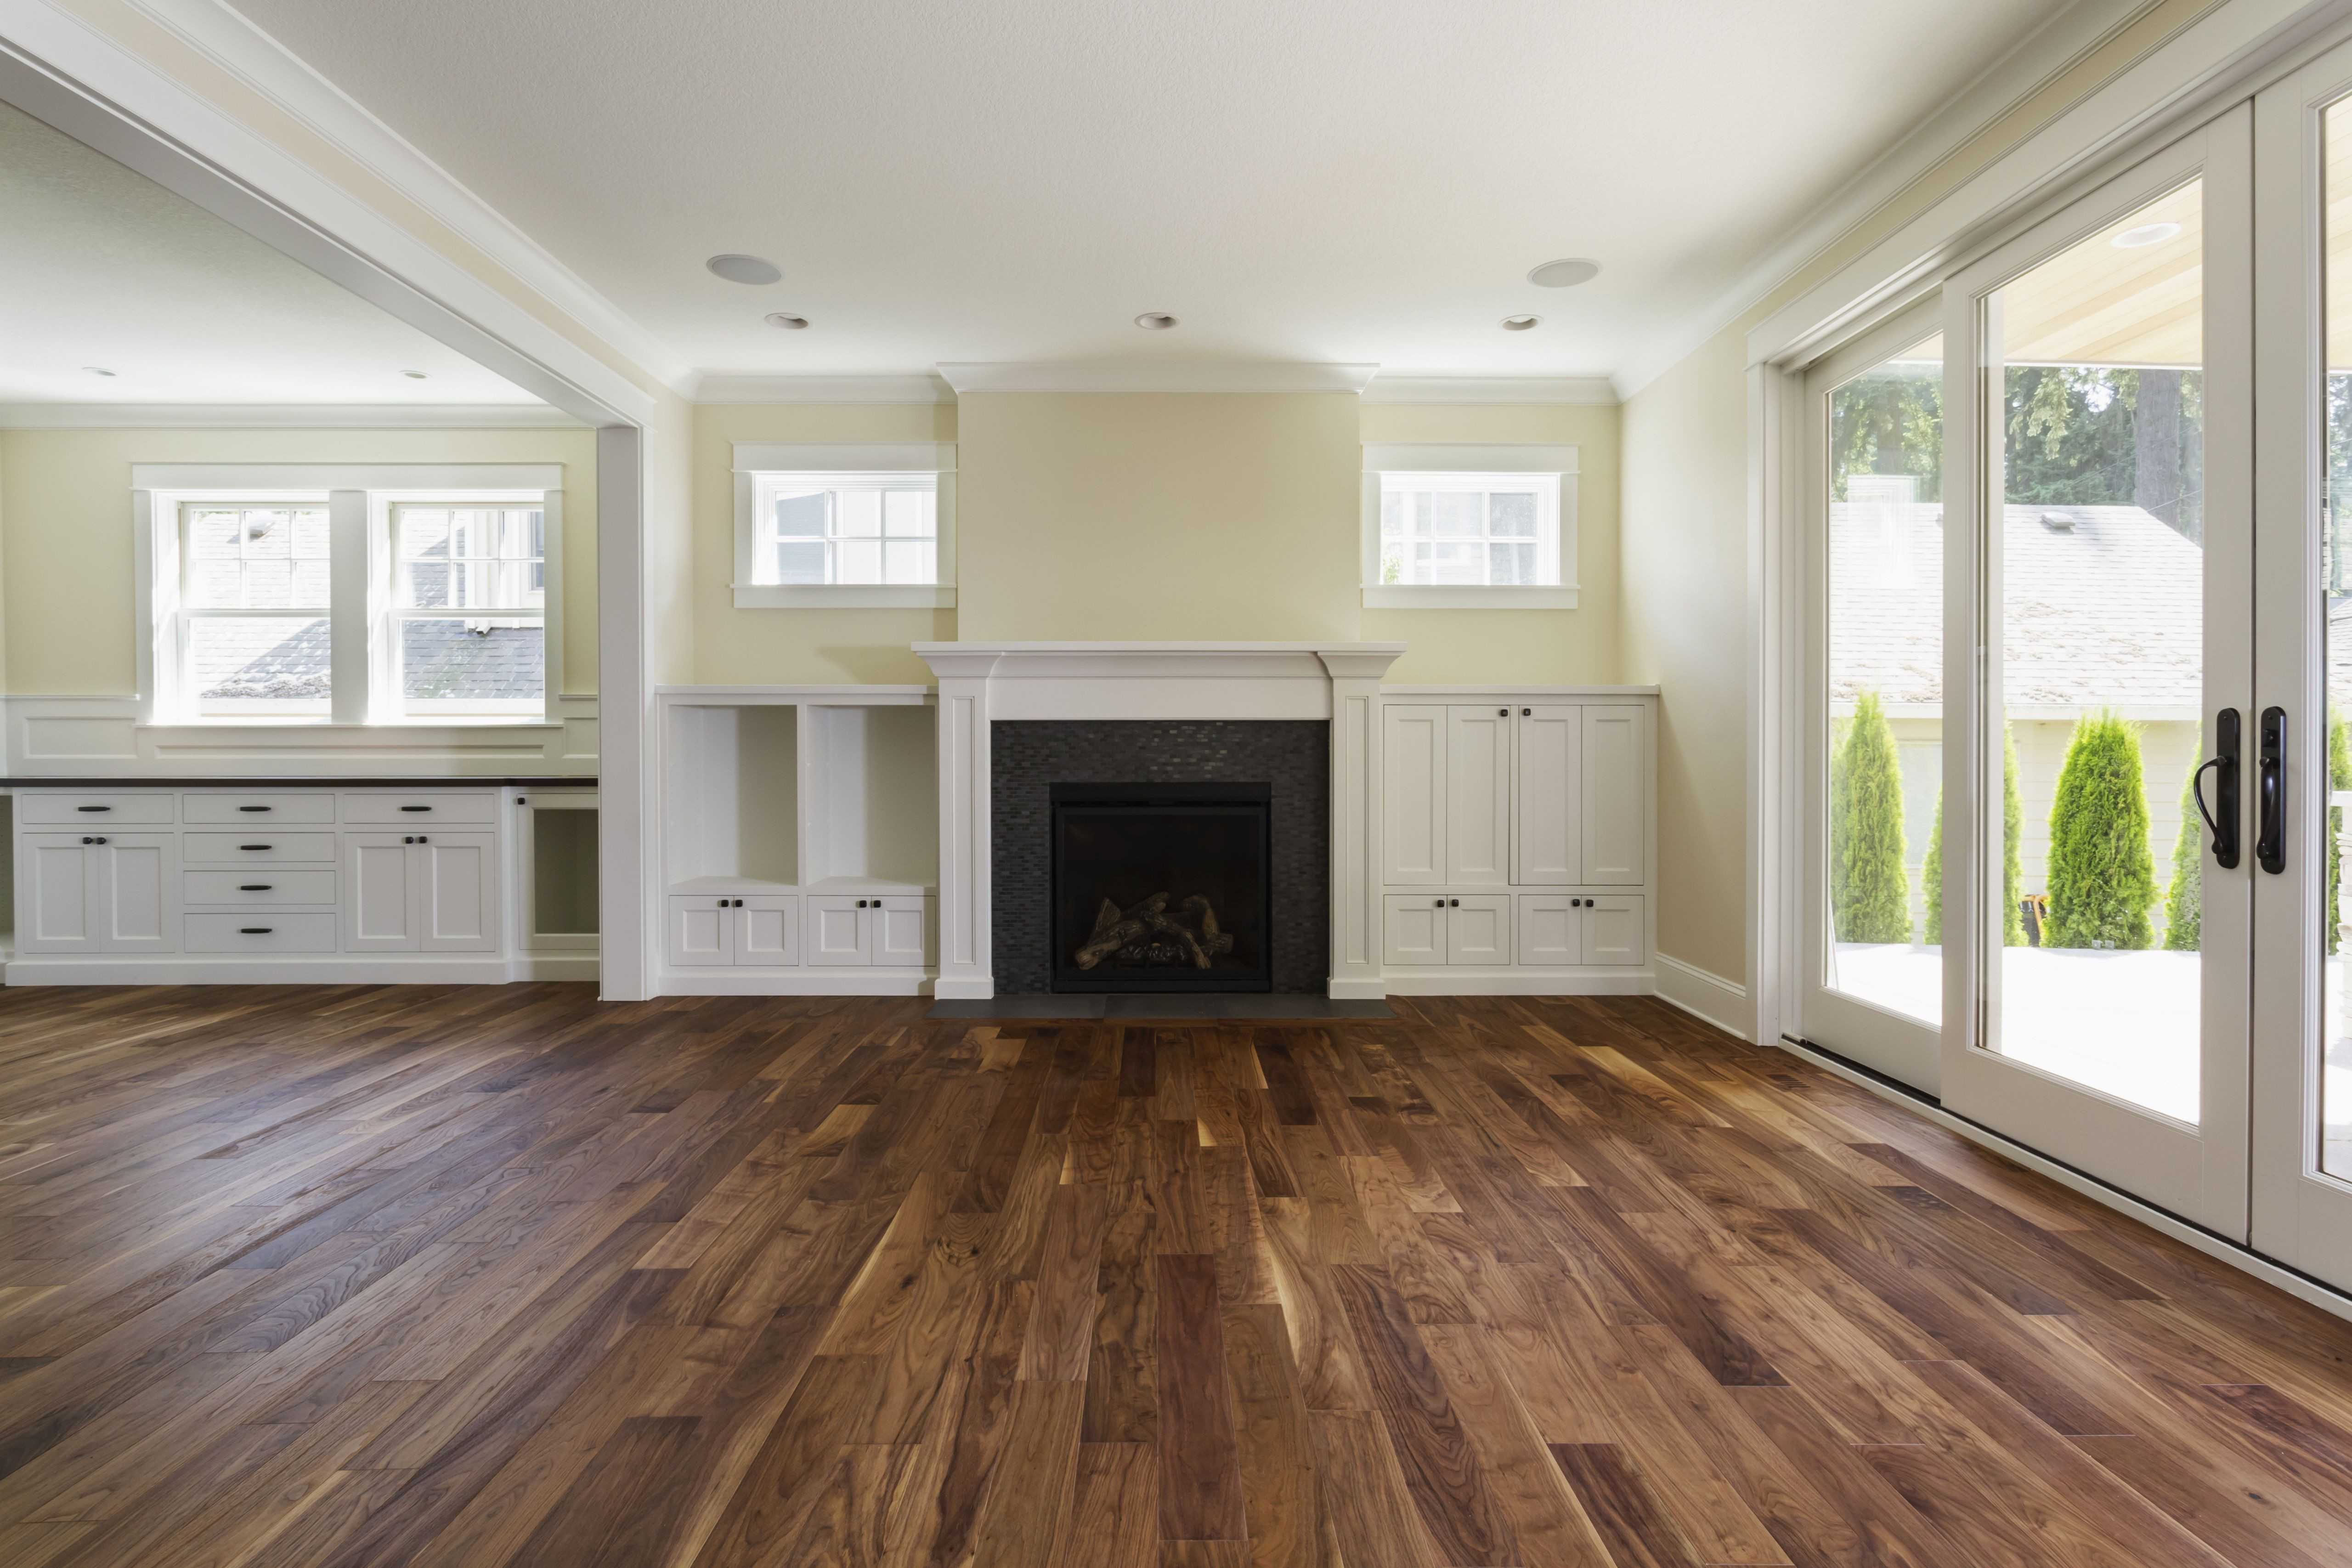 19 Fantastic Unfinished Hardwood Flooring atlanta 2024 free download unfinished hardwood flooring atlanta of the pros and cons of prefinished hardwood flooring throughout fireplace and built in shelves in living room 482143011 57bef8e33df78cc16e035397